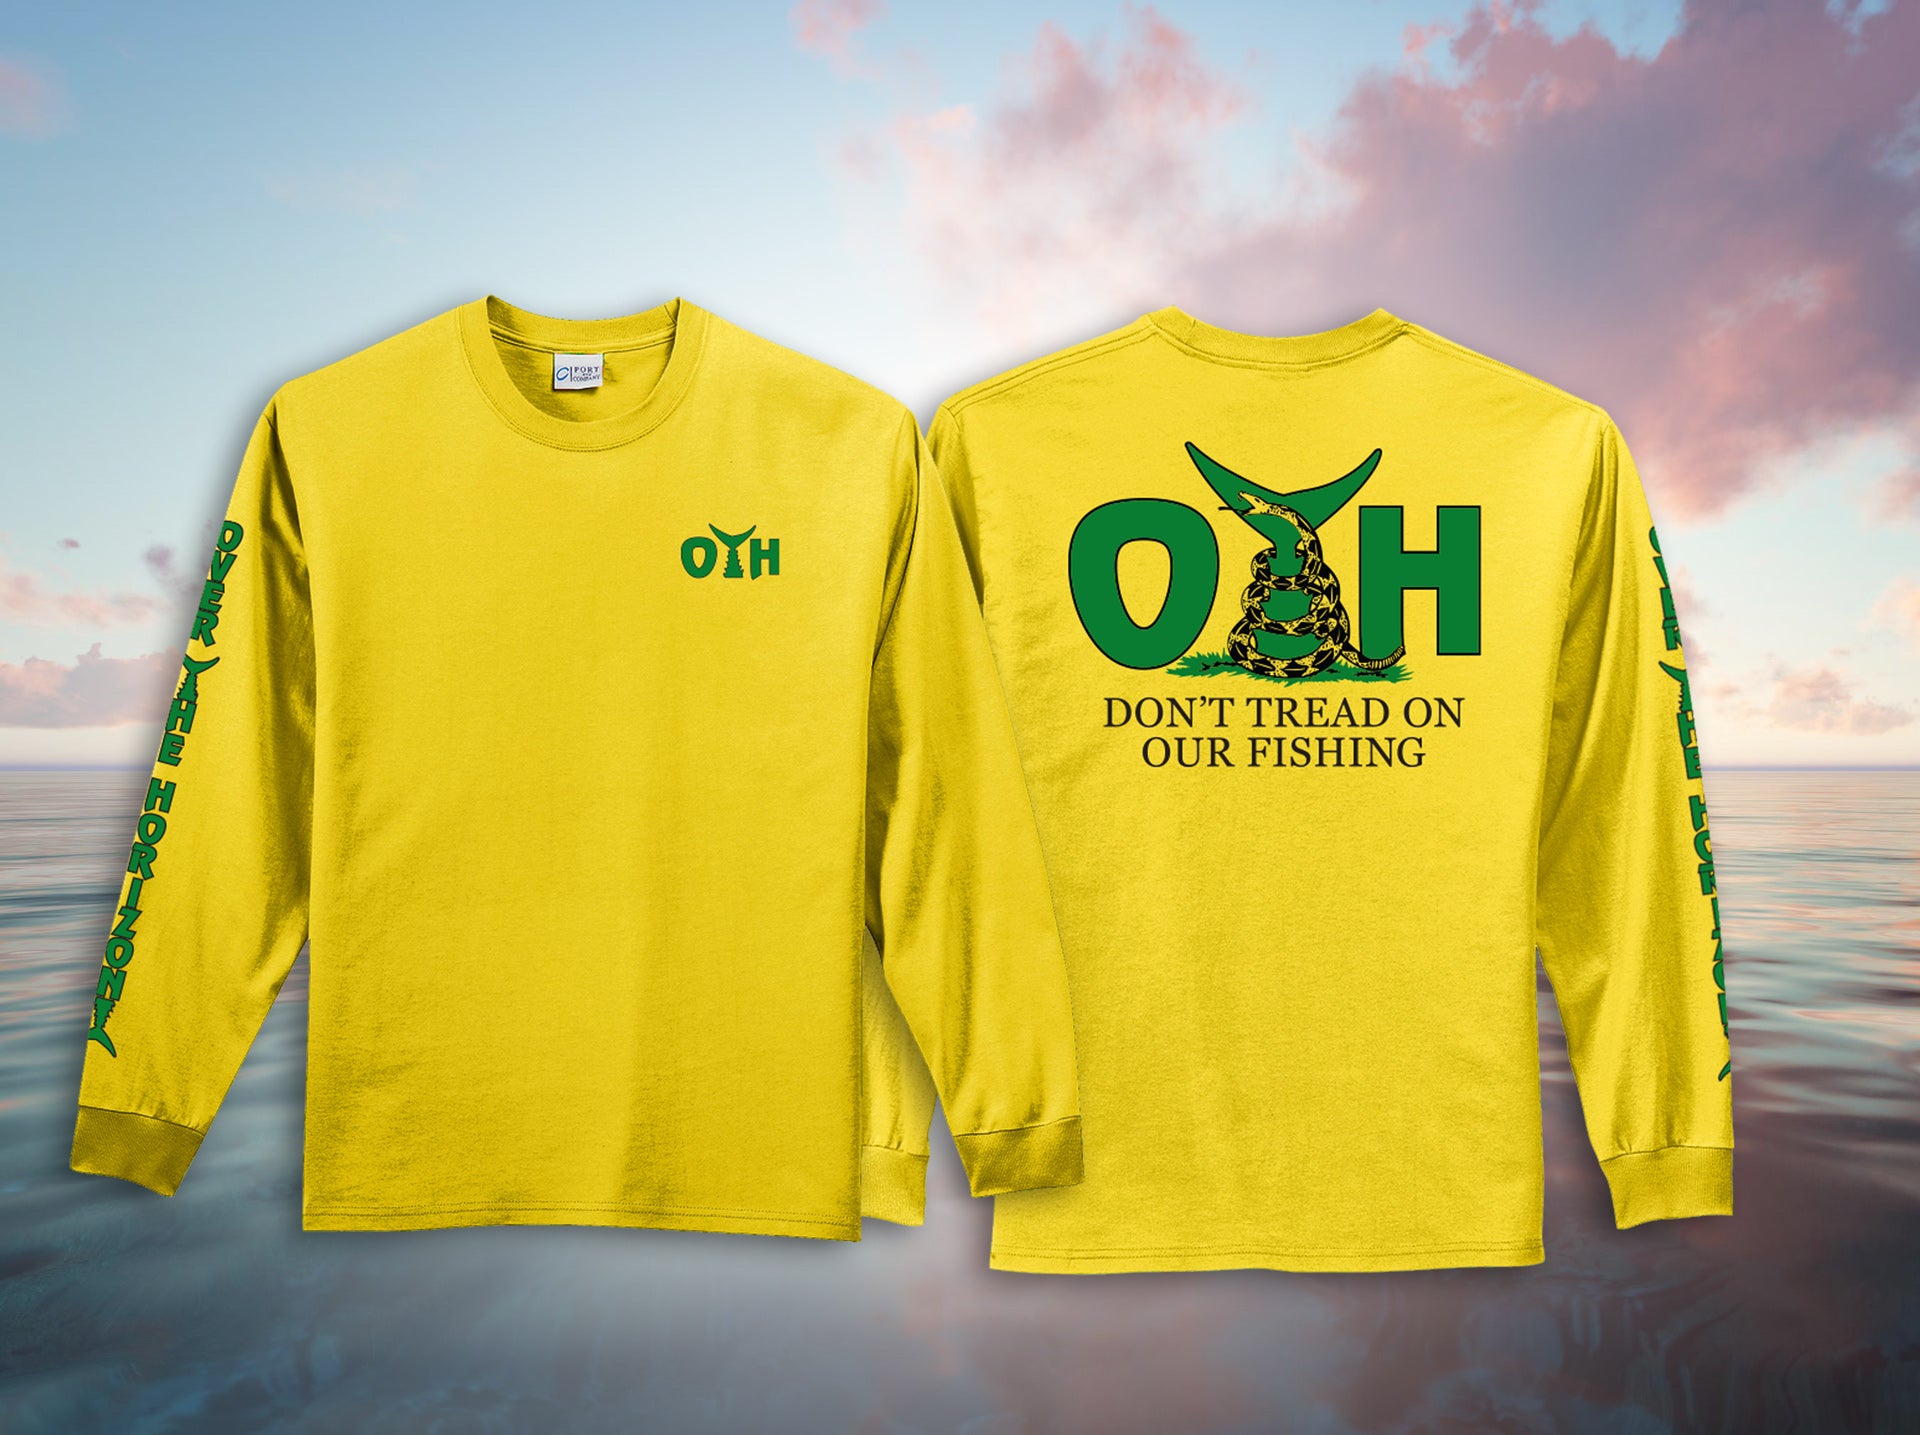 Don't Tread On Our fishing O.T.H. Long Sleeve Cotton